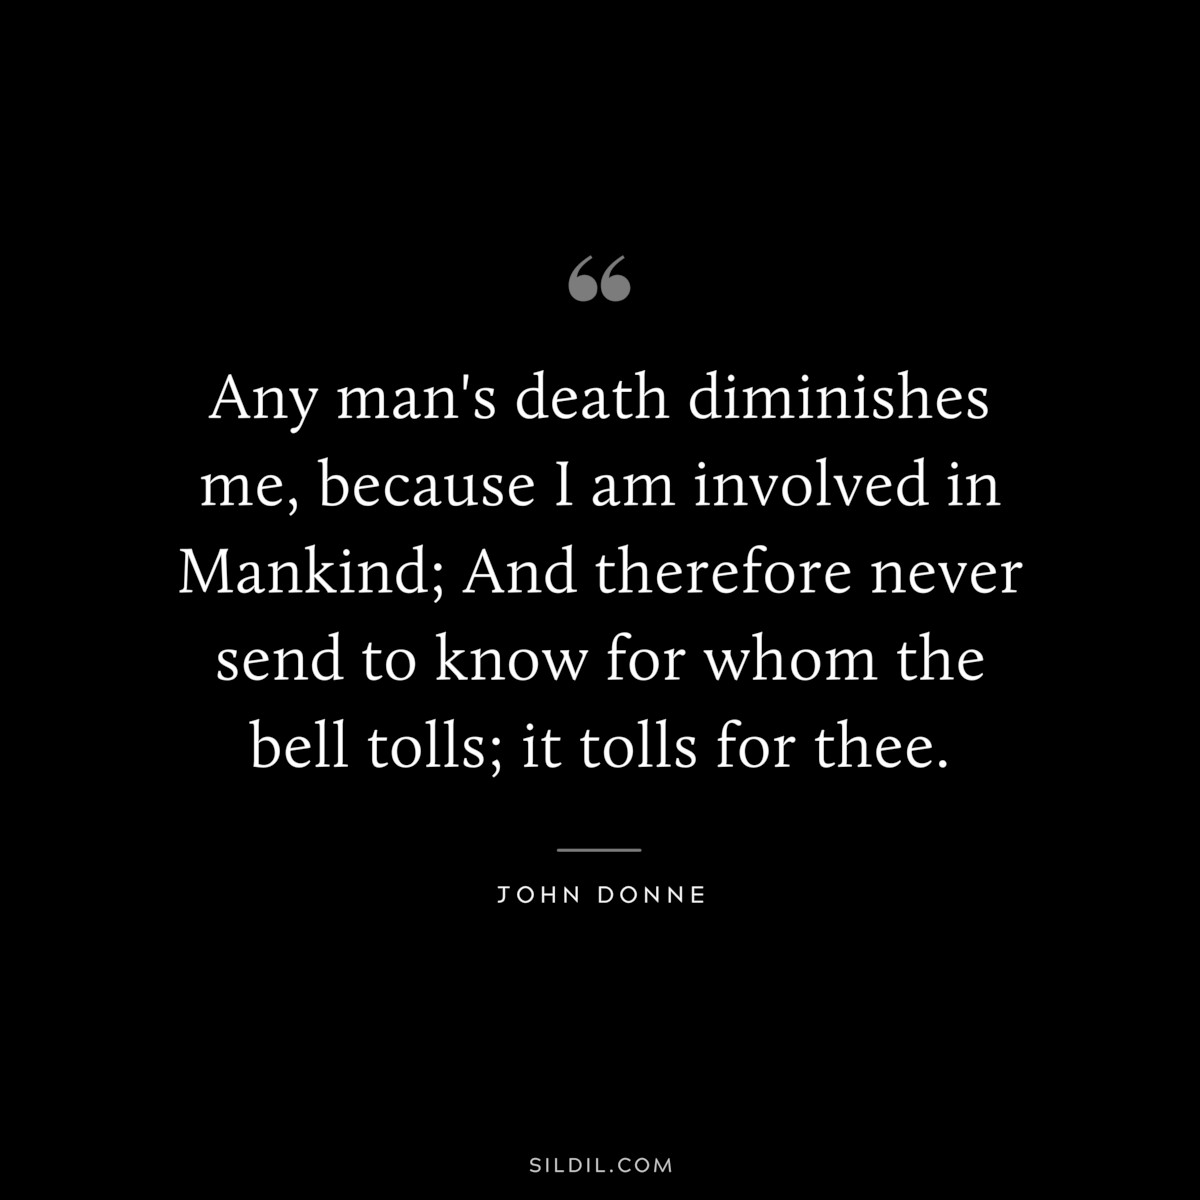 Any man's death diminishes me, because I am involved in Mankind; And therefore never send to know for whom the bell tolls; it tolls for thee. ― John Donne